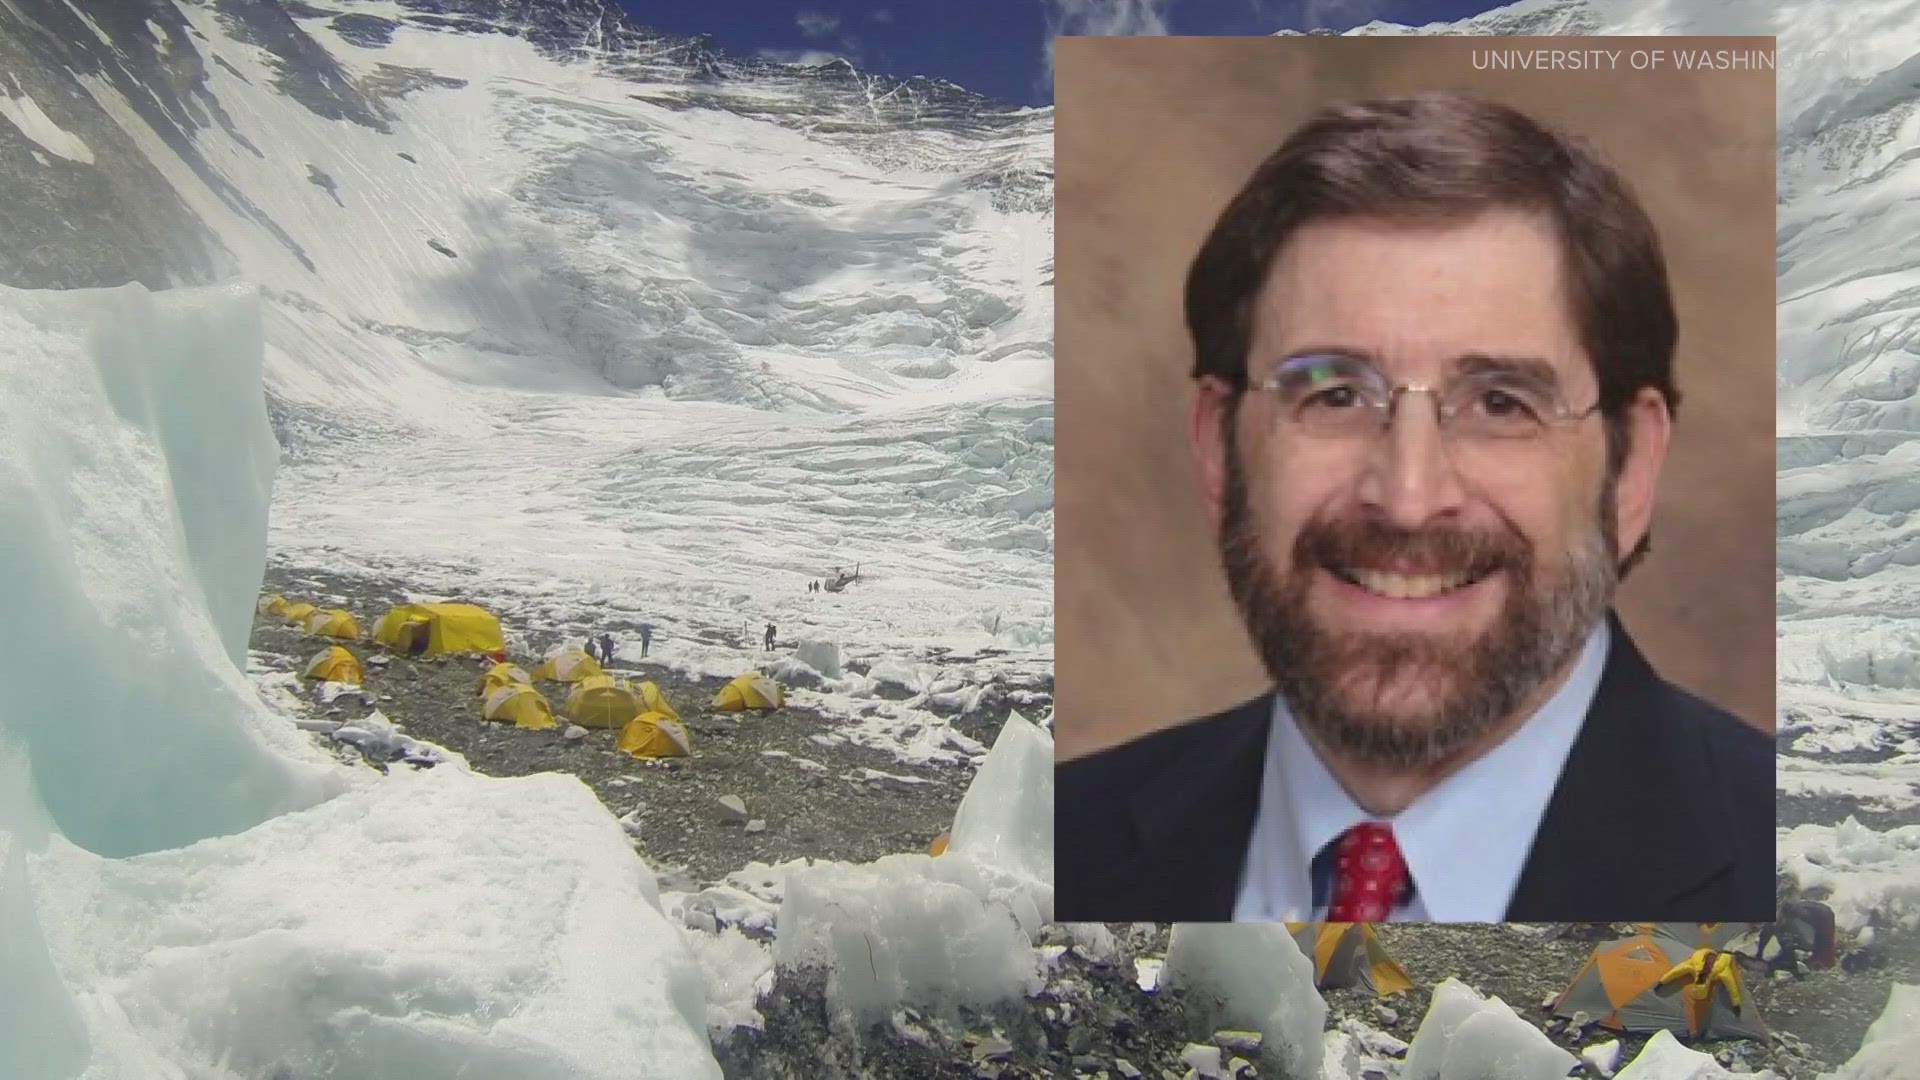 A Seattle doctor died while climbing Mount Everest, the U.S. Embassy confirmed to NBC News on Tuesday.